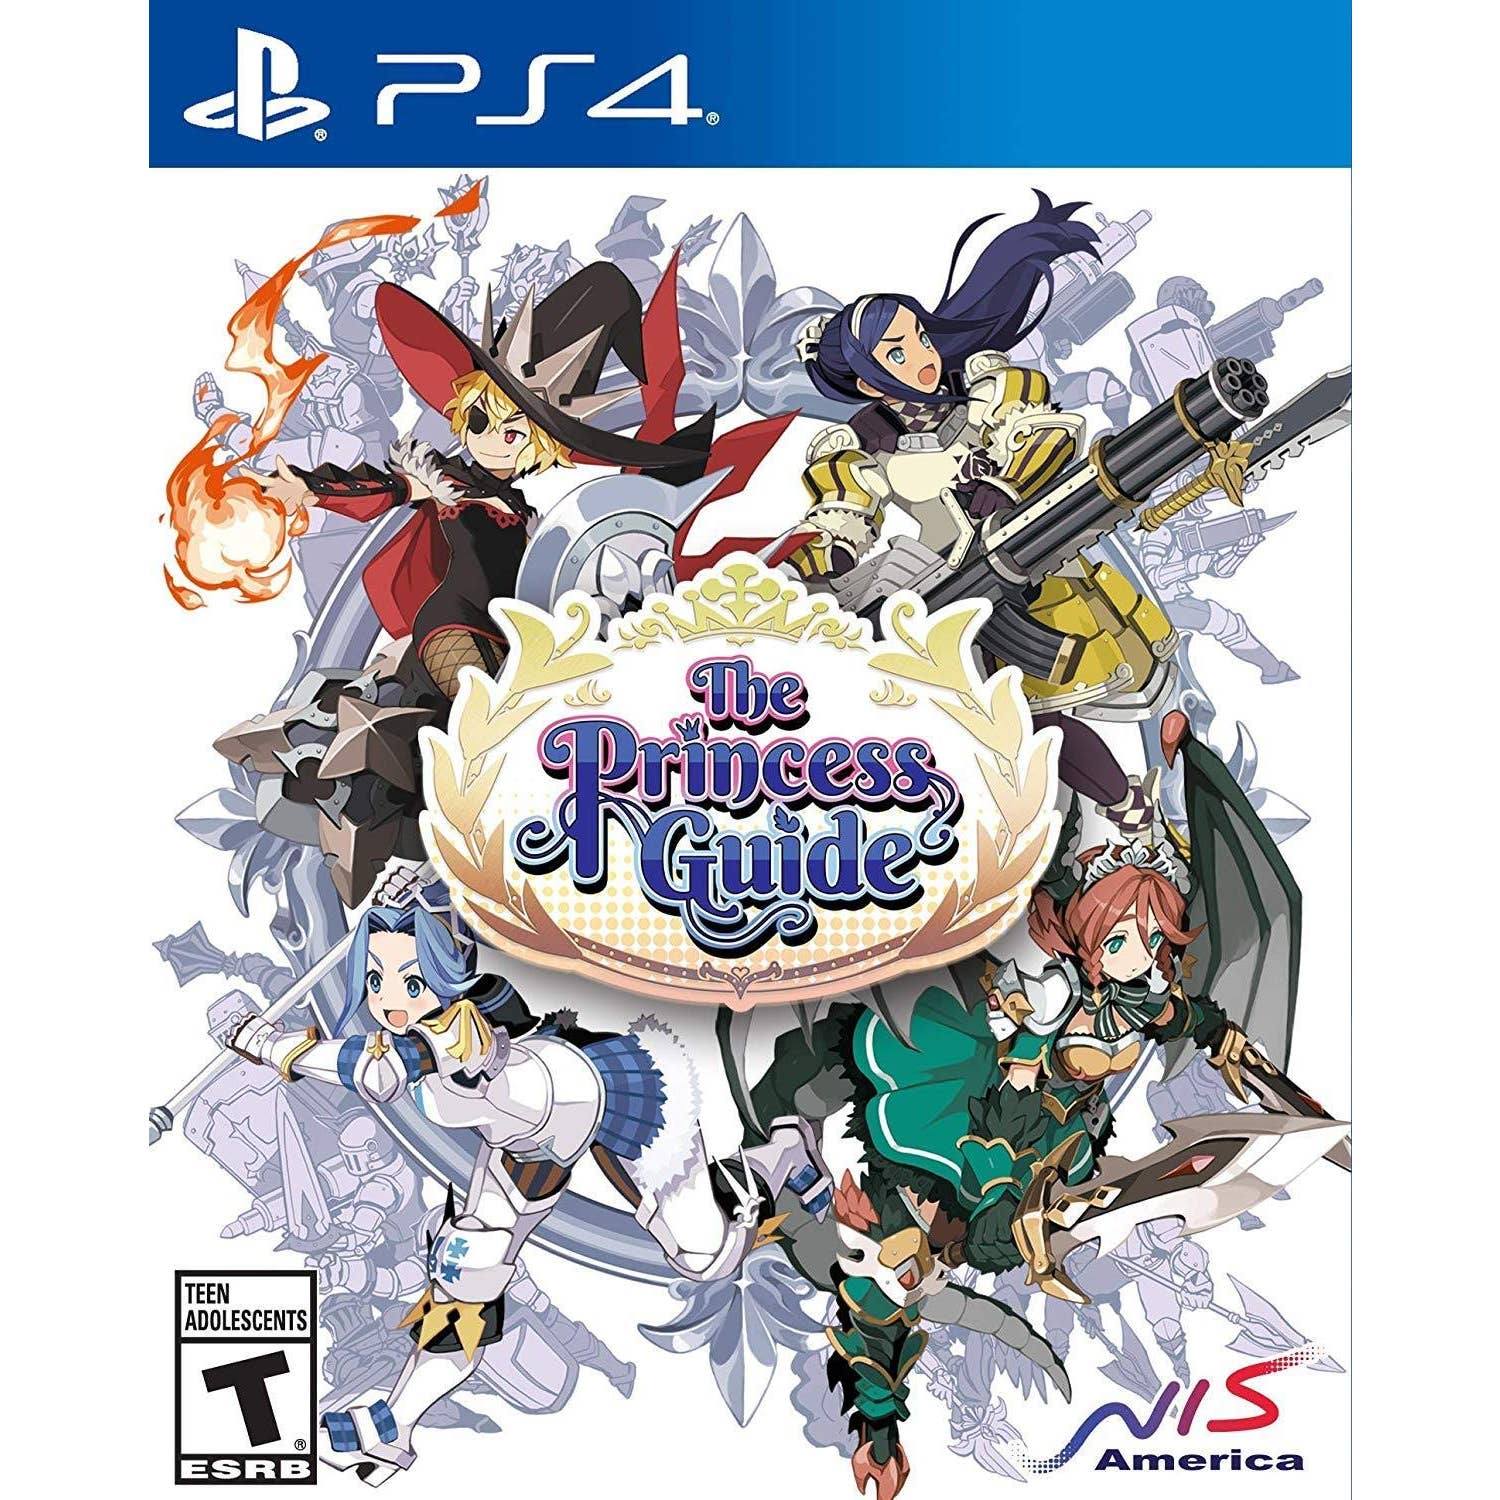 NIS America- PG-03204-5 The Princess Guide - PlayStation 4